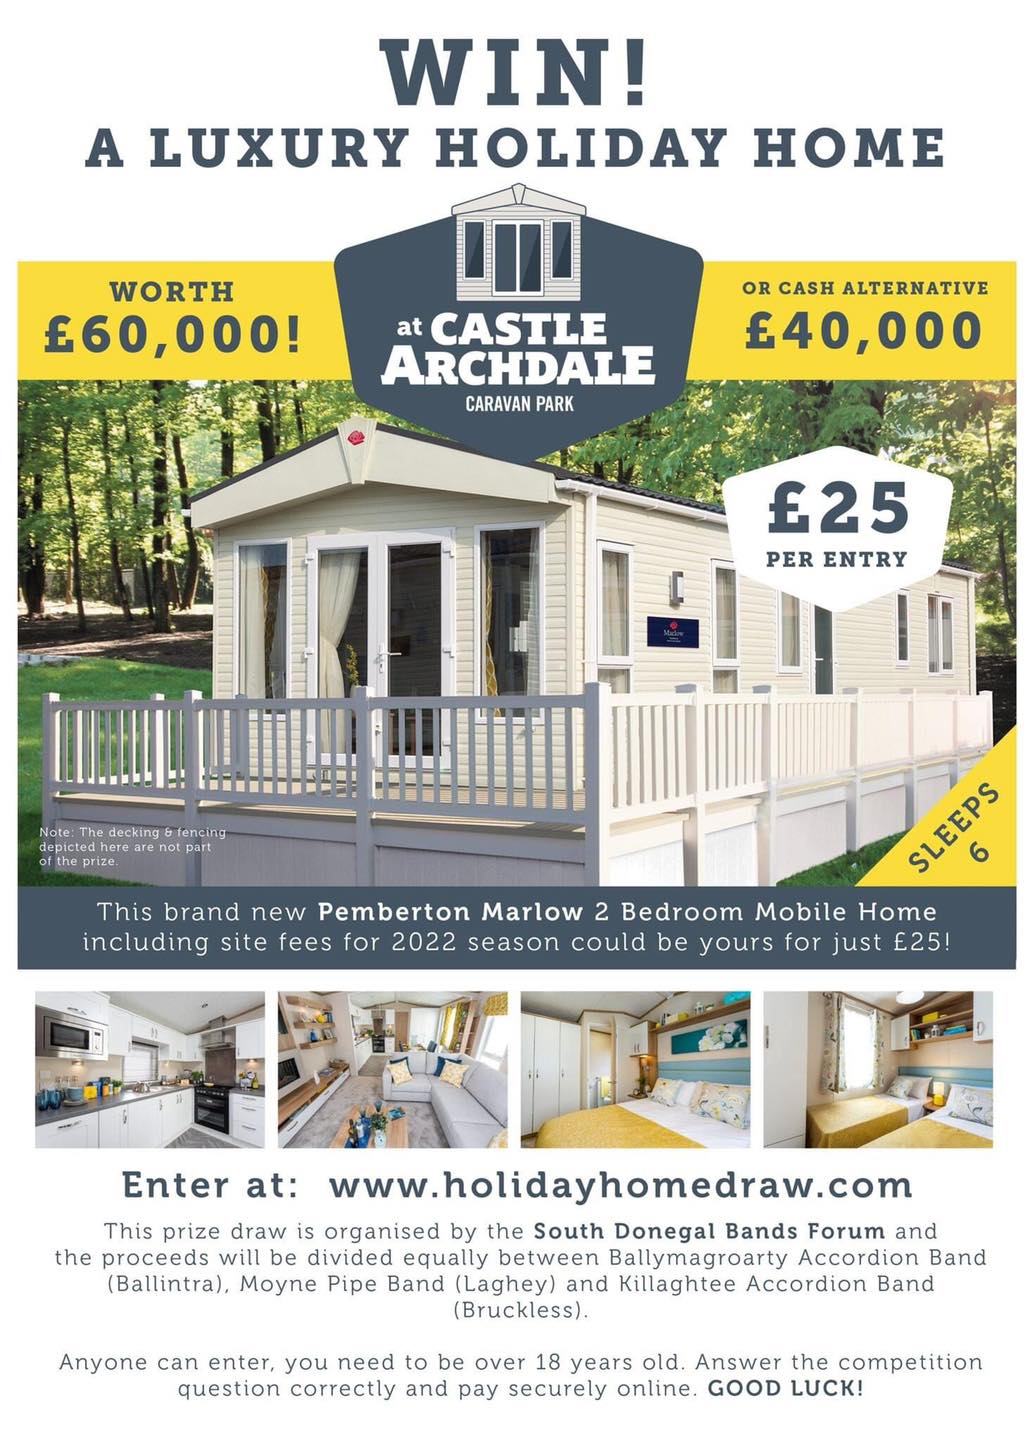 Win a holiday home worth £60,000